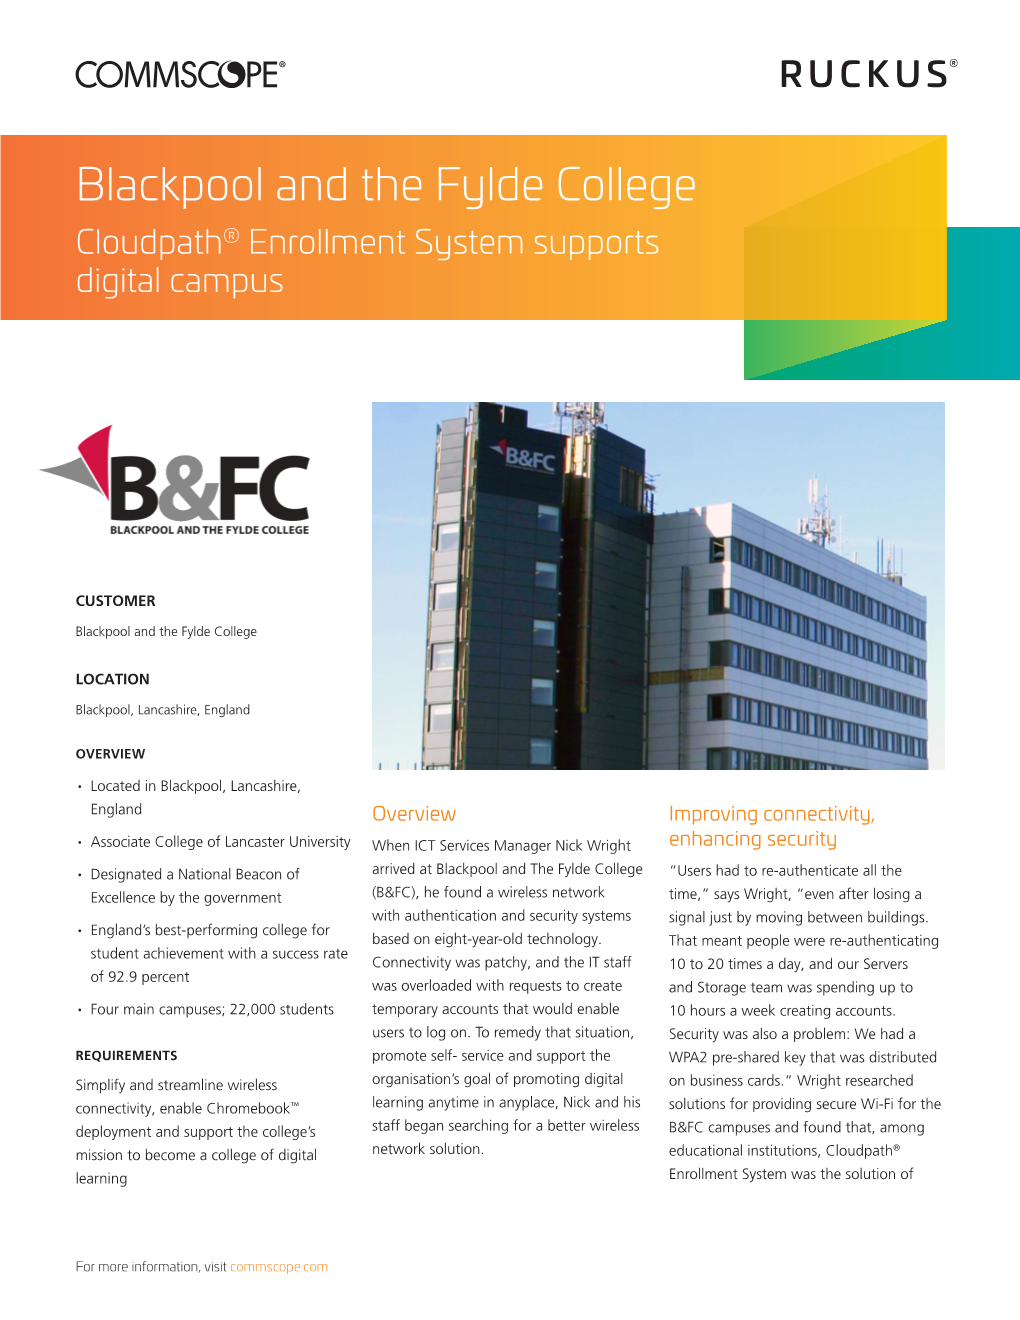 Blackpool and the Fylde College Case Study